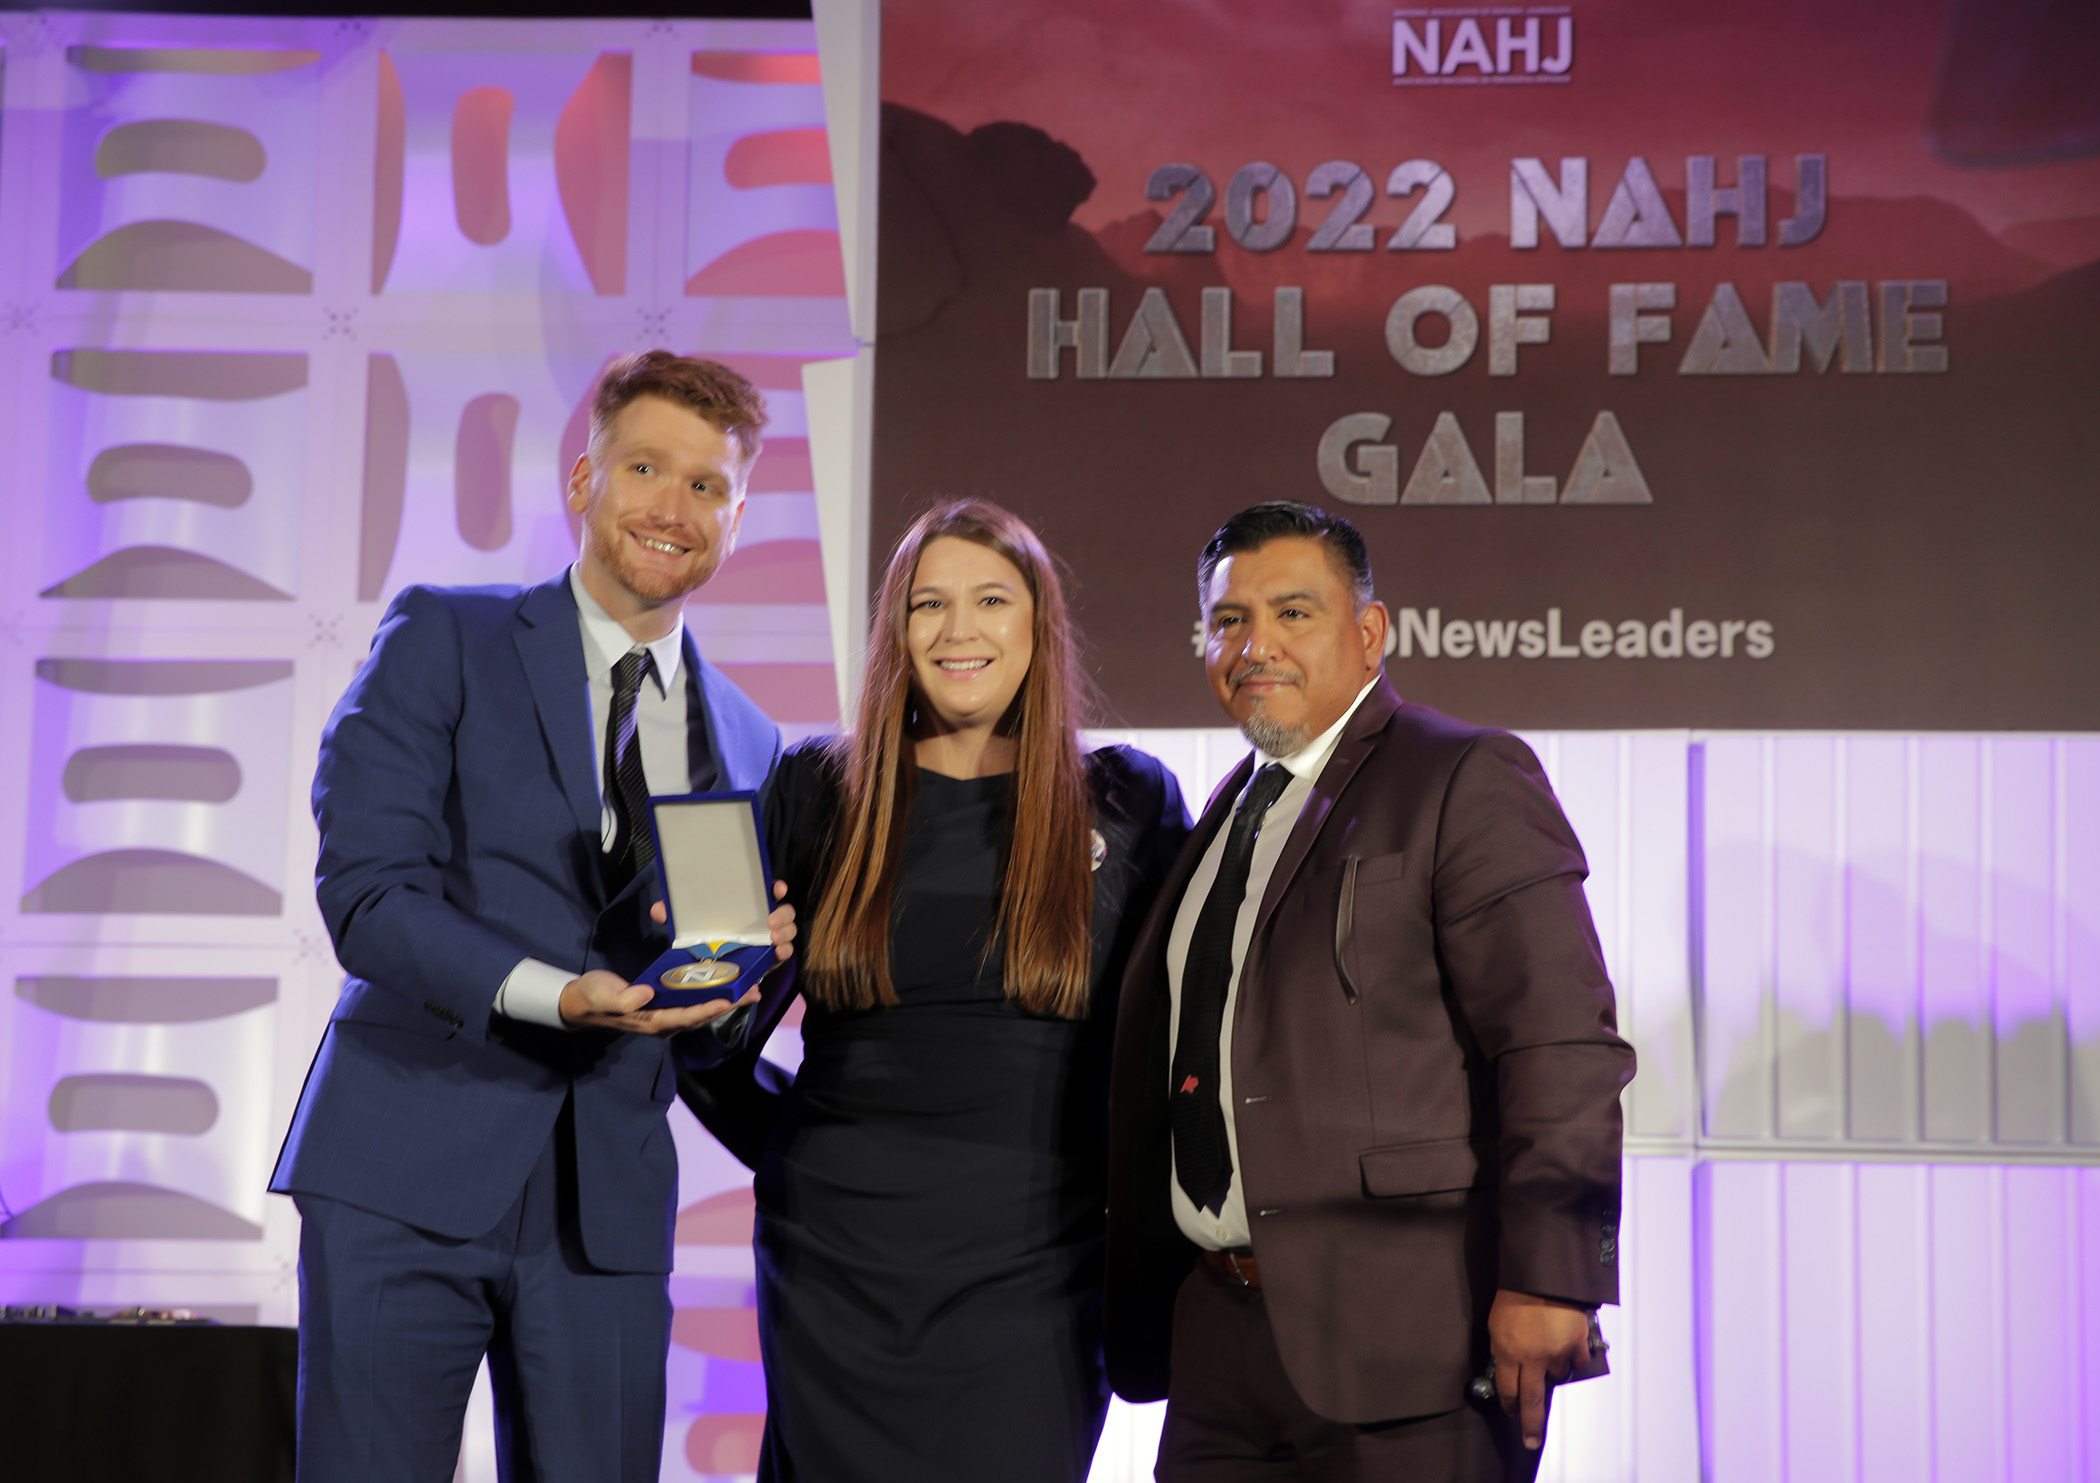 Julio Cortez presents a posthumous Hall of Fame induction medal to Steve Gonzales's children at the 2022 NAHJ Hall of Fame Gala in Las Vegas, Nev., on Saturday, August 5, 2022.